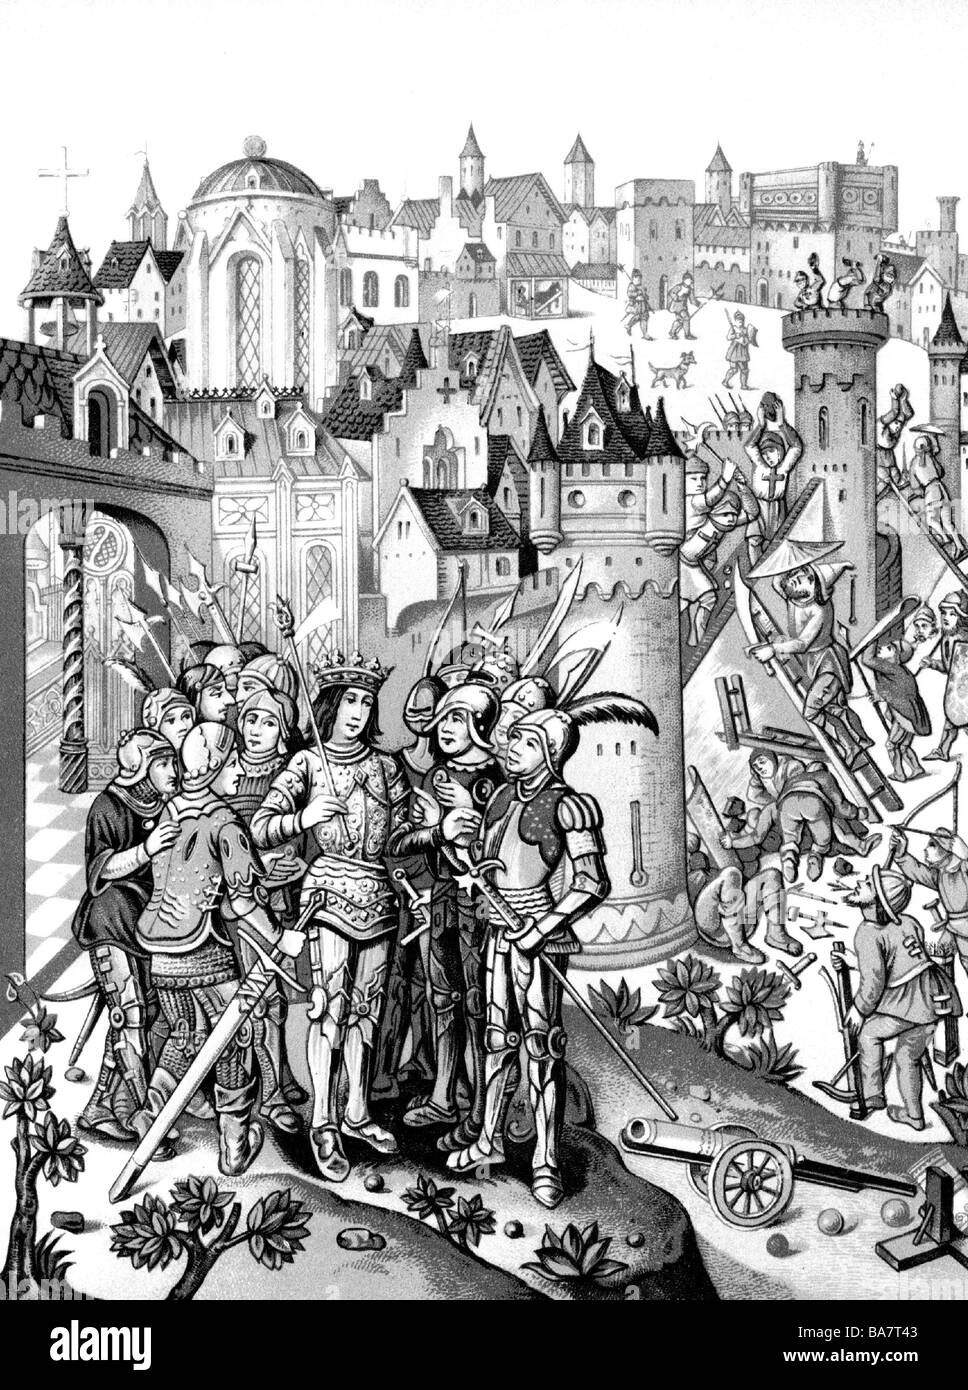 Charles VI 'the Mad', 3.12.1368 - 21.10.1422, King of France 1380 - 1422, besieging a town defended by the Burgundians, chromolithograph after miniature from the 'Chroniques' by Monstrelet, circa 1500, Bibliotheque Ambroise Firmin-Didot, Stock Photo